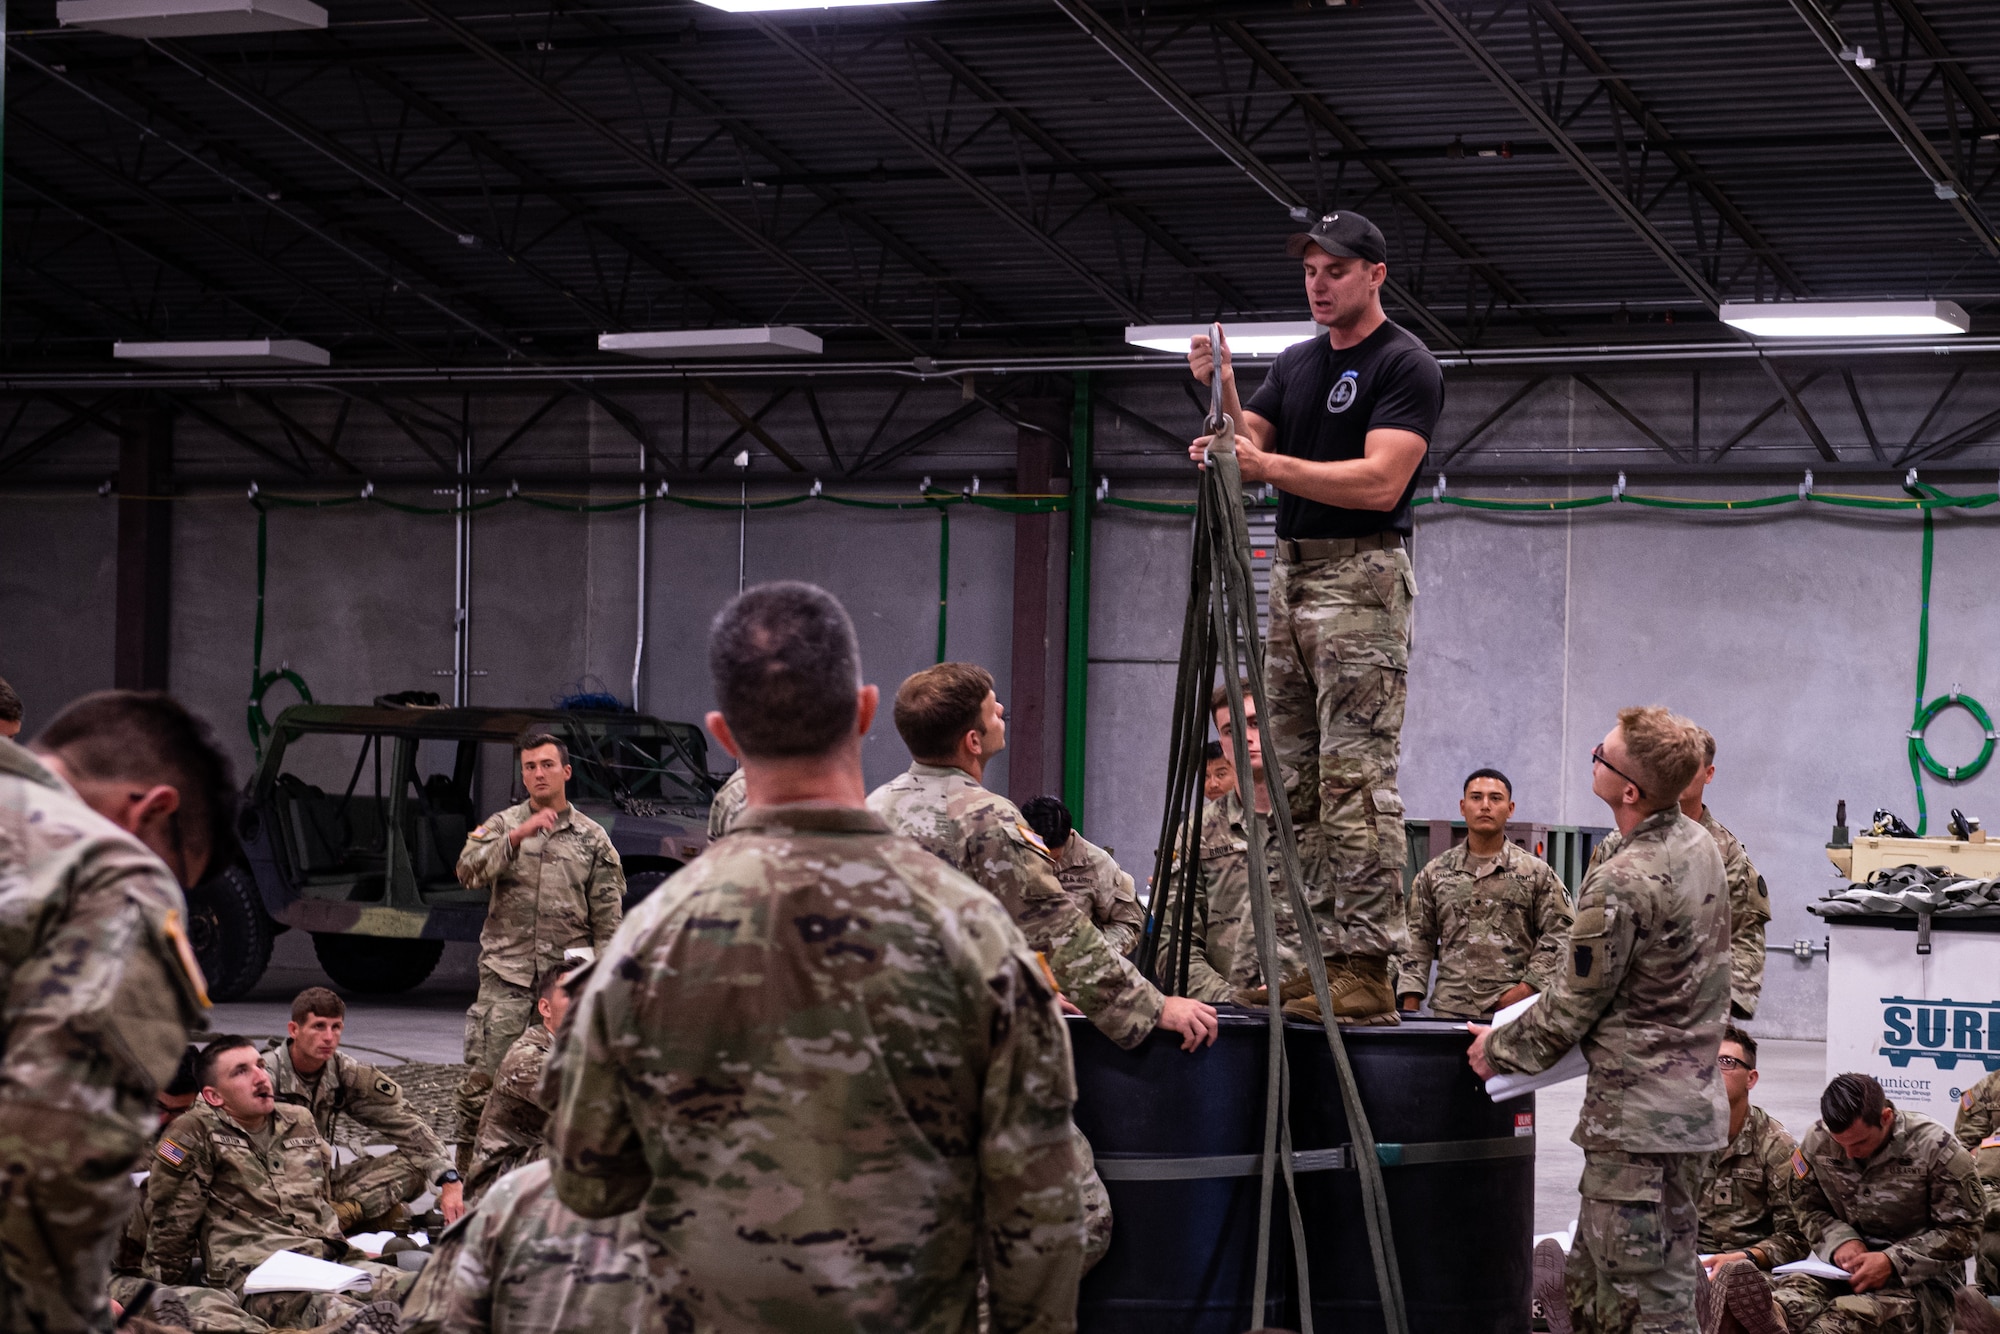 A U.S. Army Air Assault instructor teaches students the proper techniques on preparing equipment and supplies for sling load operations August 6, 2022, in Annville, Pennsylvania.